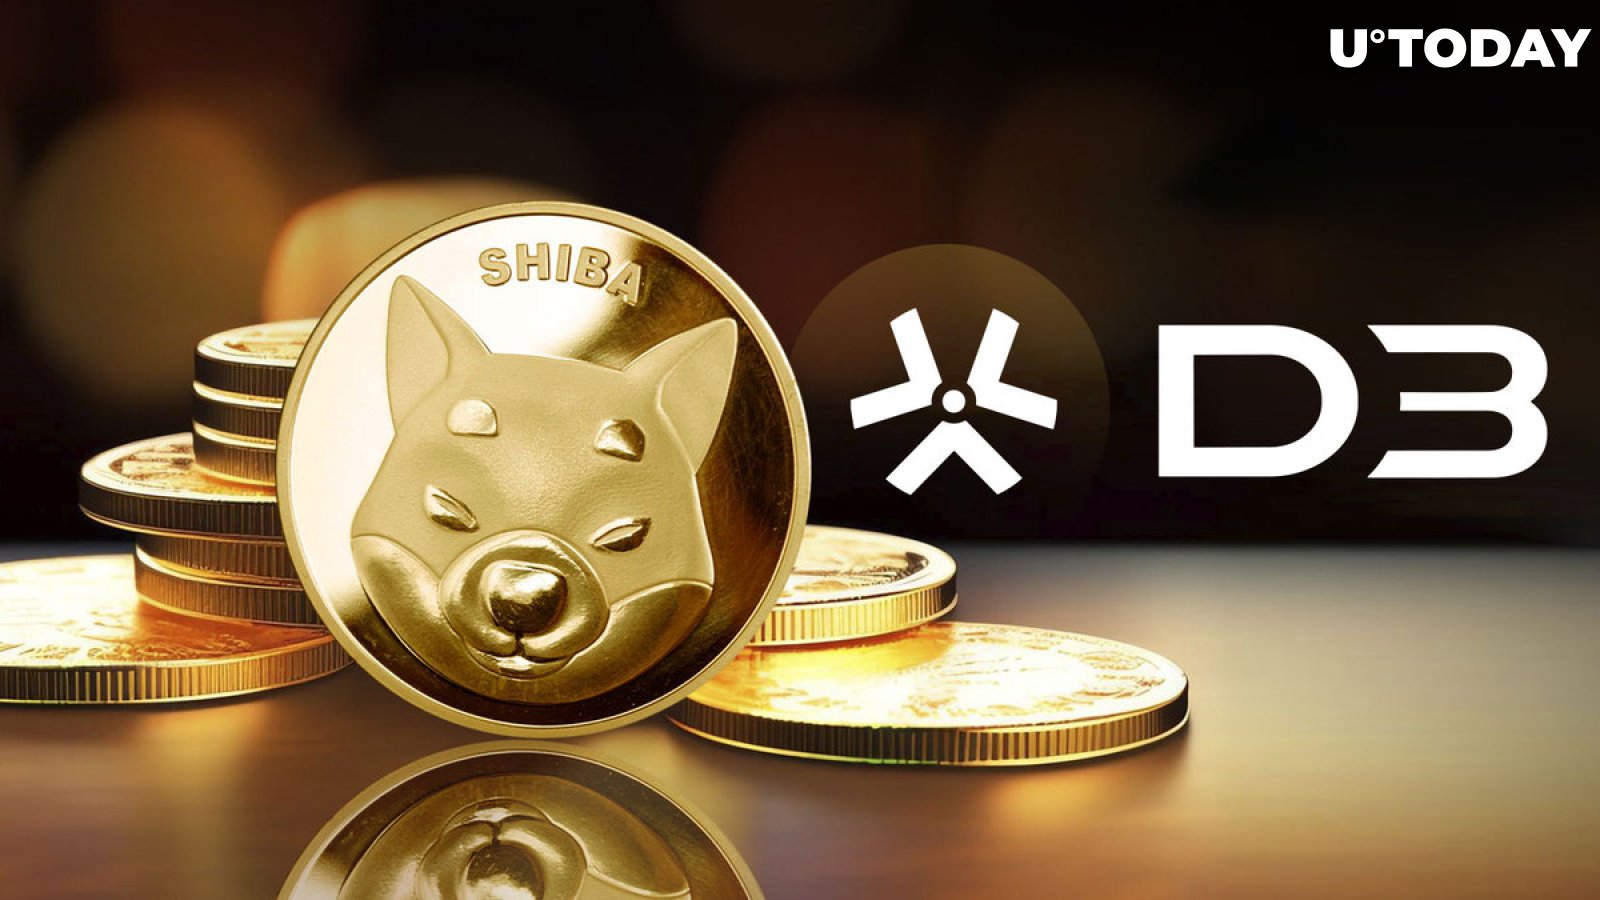 Shiba Inu (SHIB) Launches Domain Name System With D3, Viction Follows